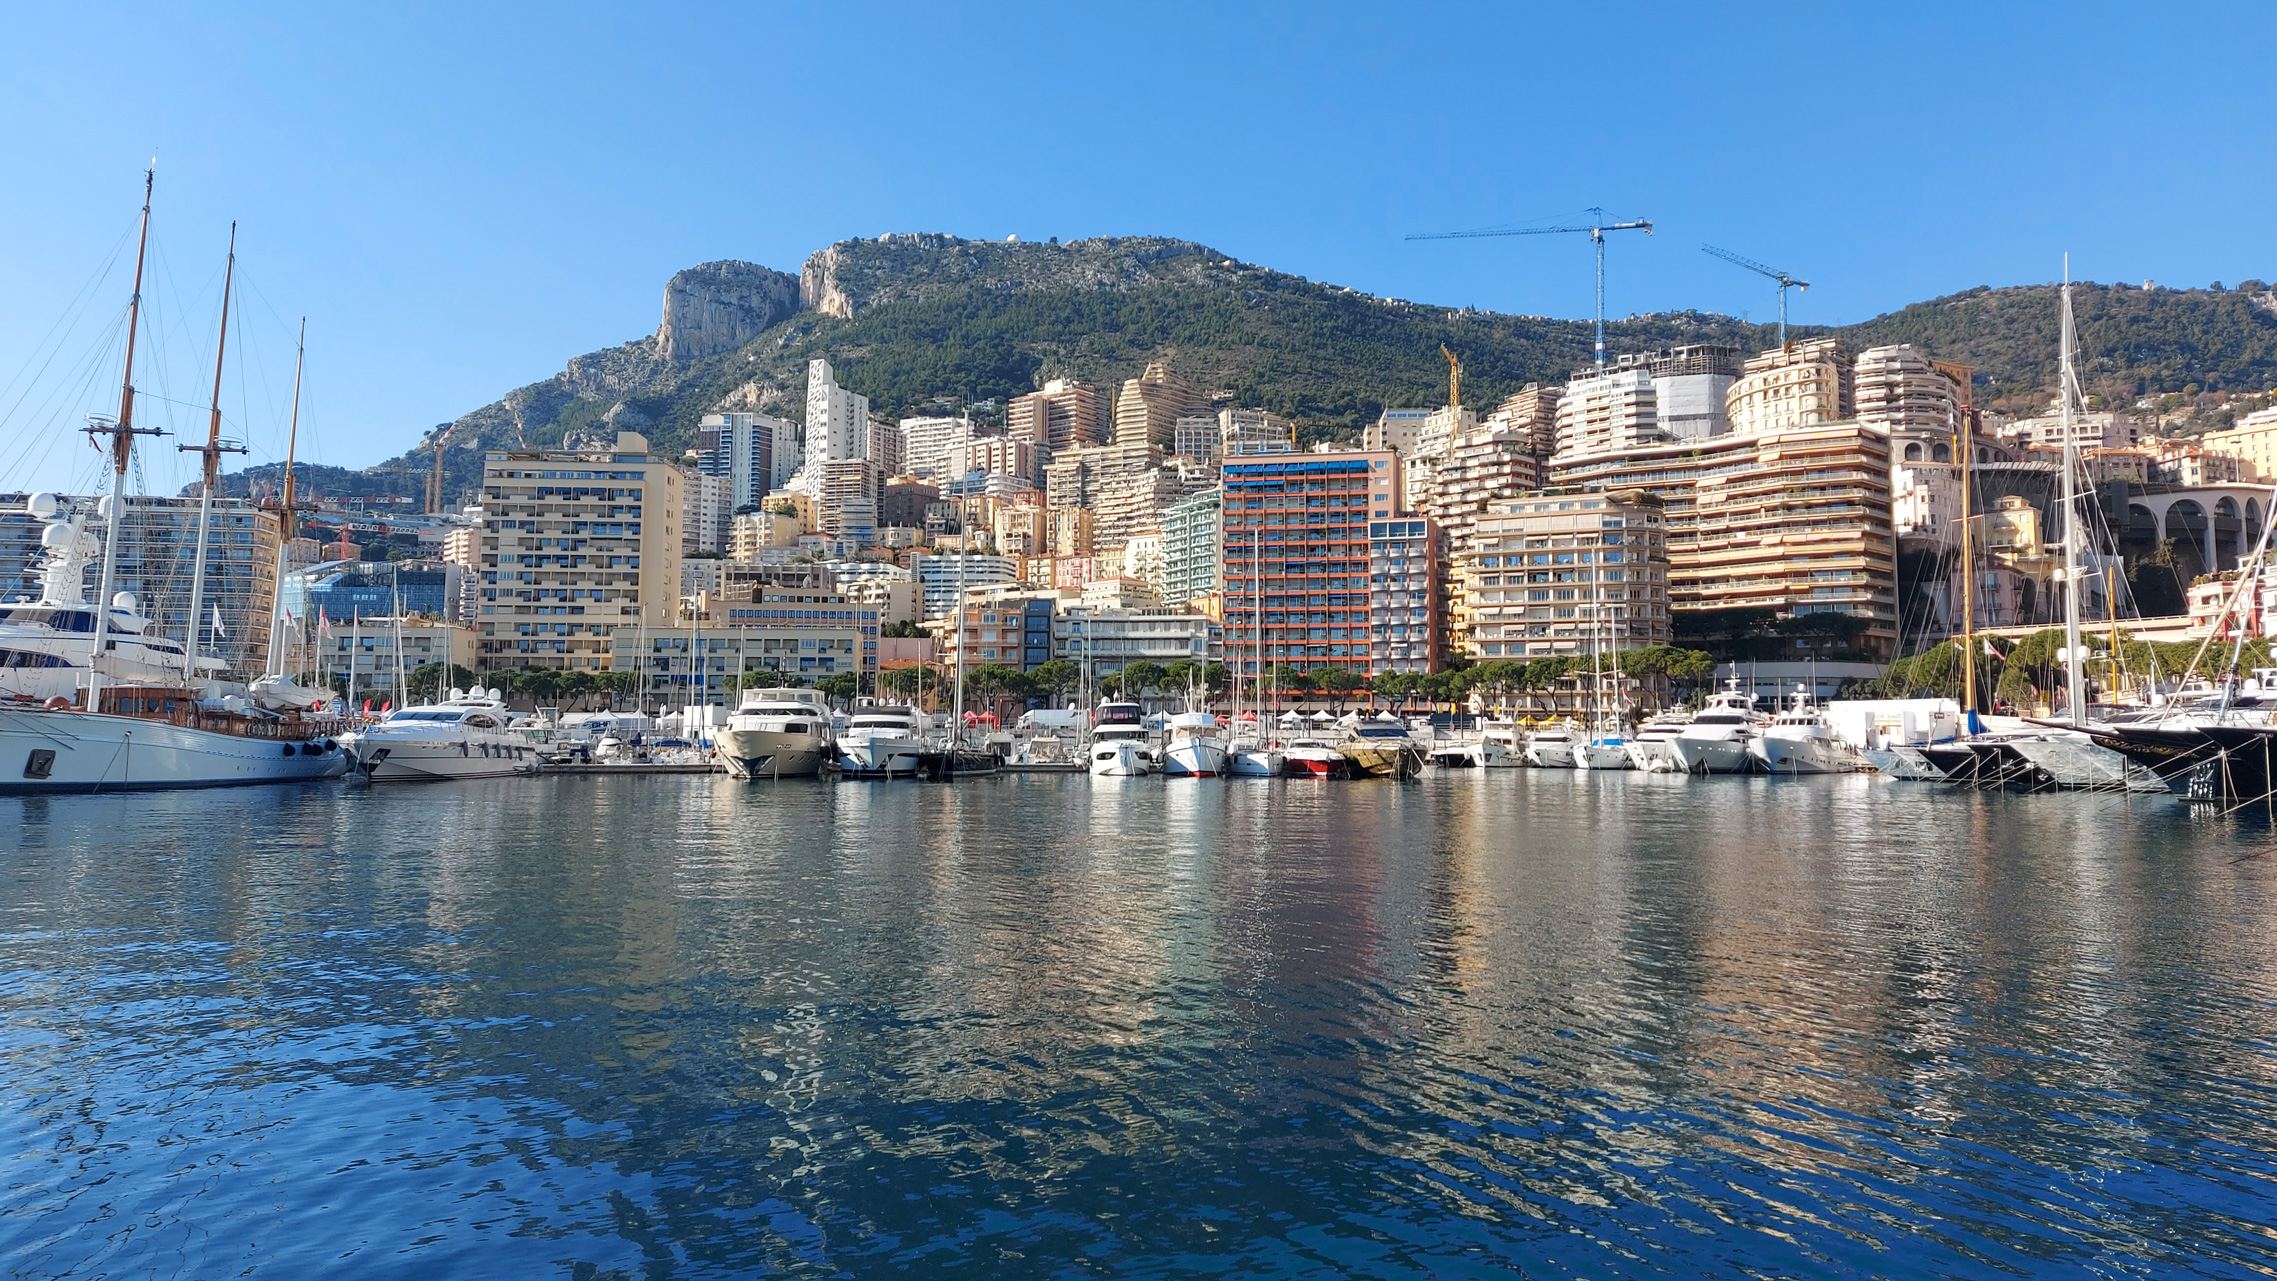 monaco gp: what does the track look like normally?